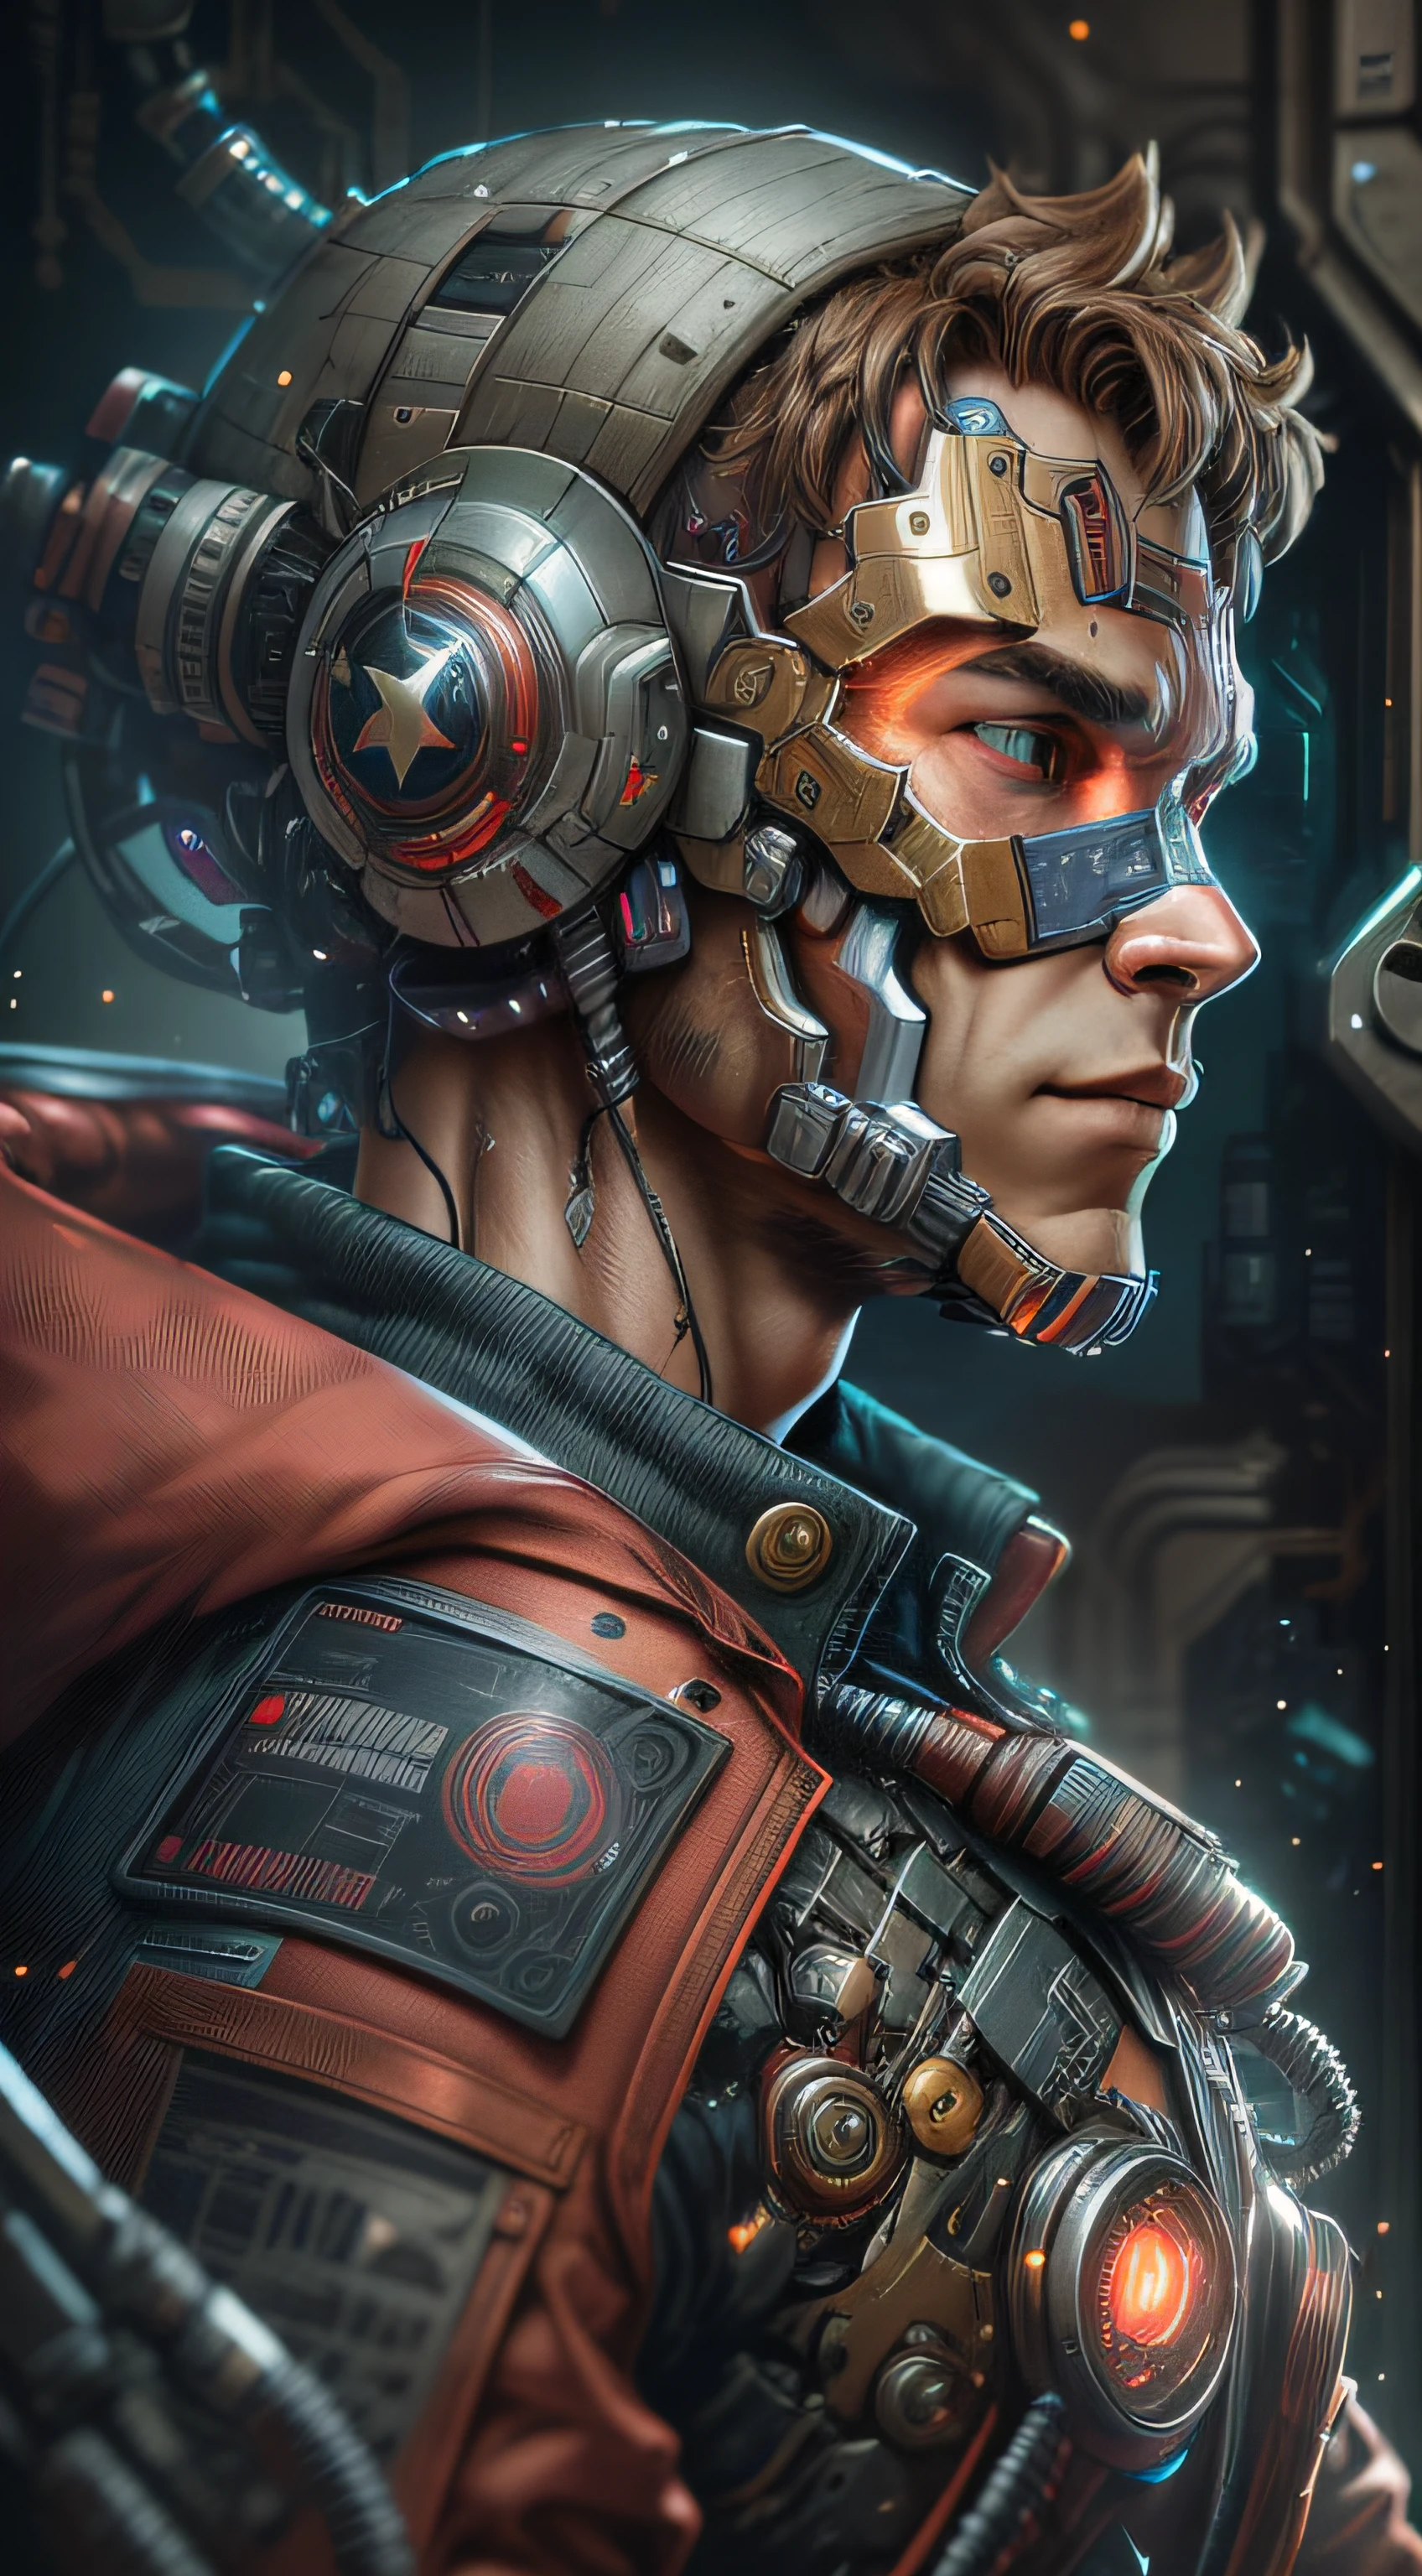 Peter Quill StarLord mask on, red jacket, from Marvel photography, biomechanical, complex robot, full growth, hyperrealistic, insane small details, extremely clean lines, cyberpunk aesthetic, masterpiece featured on Zbrush Central